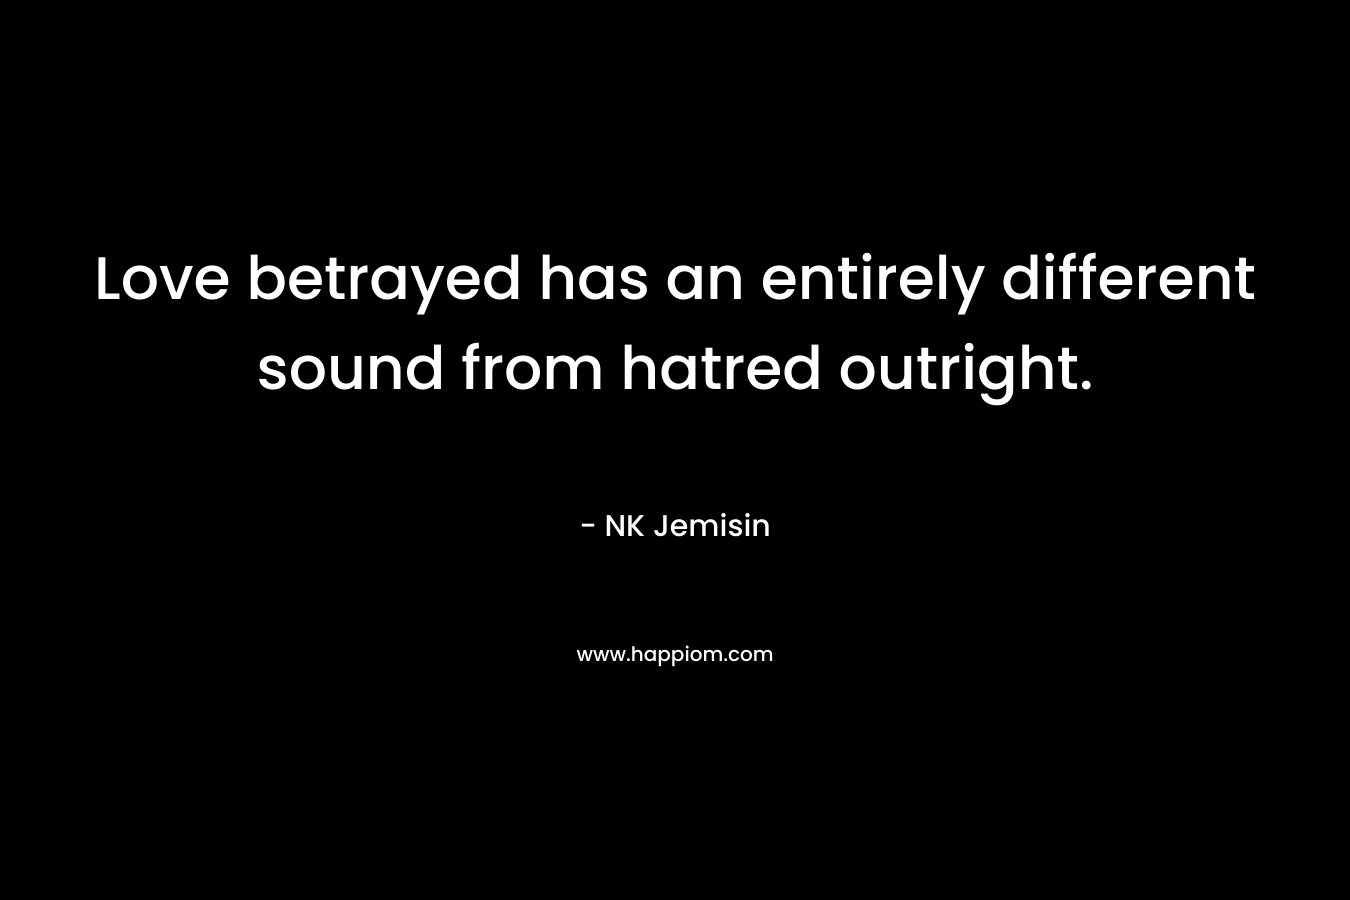 Love betrayed has an entirely different sound from hatred outright. – NK Jemisin